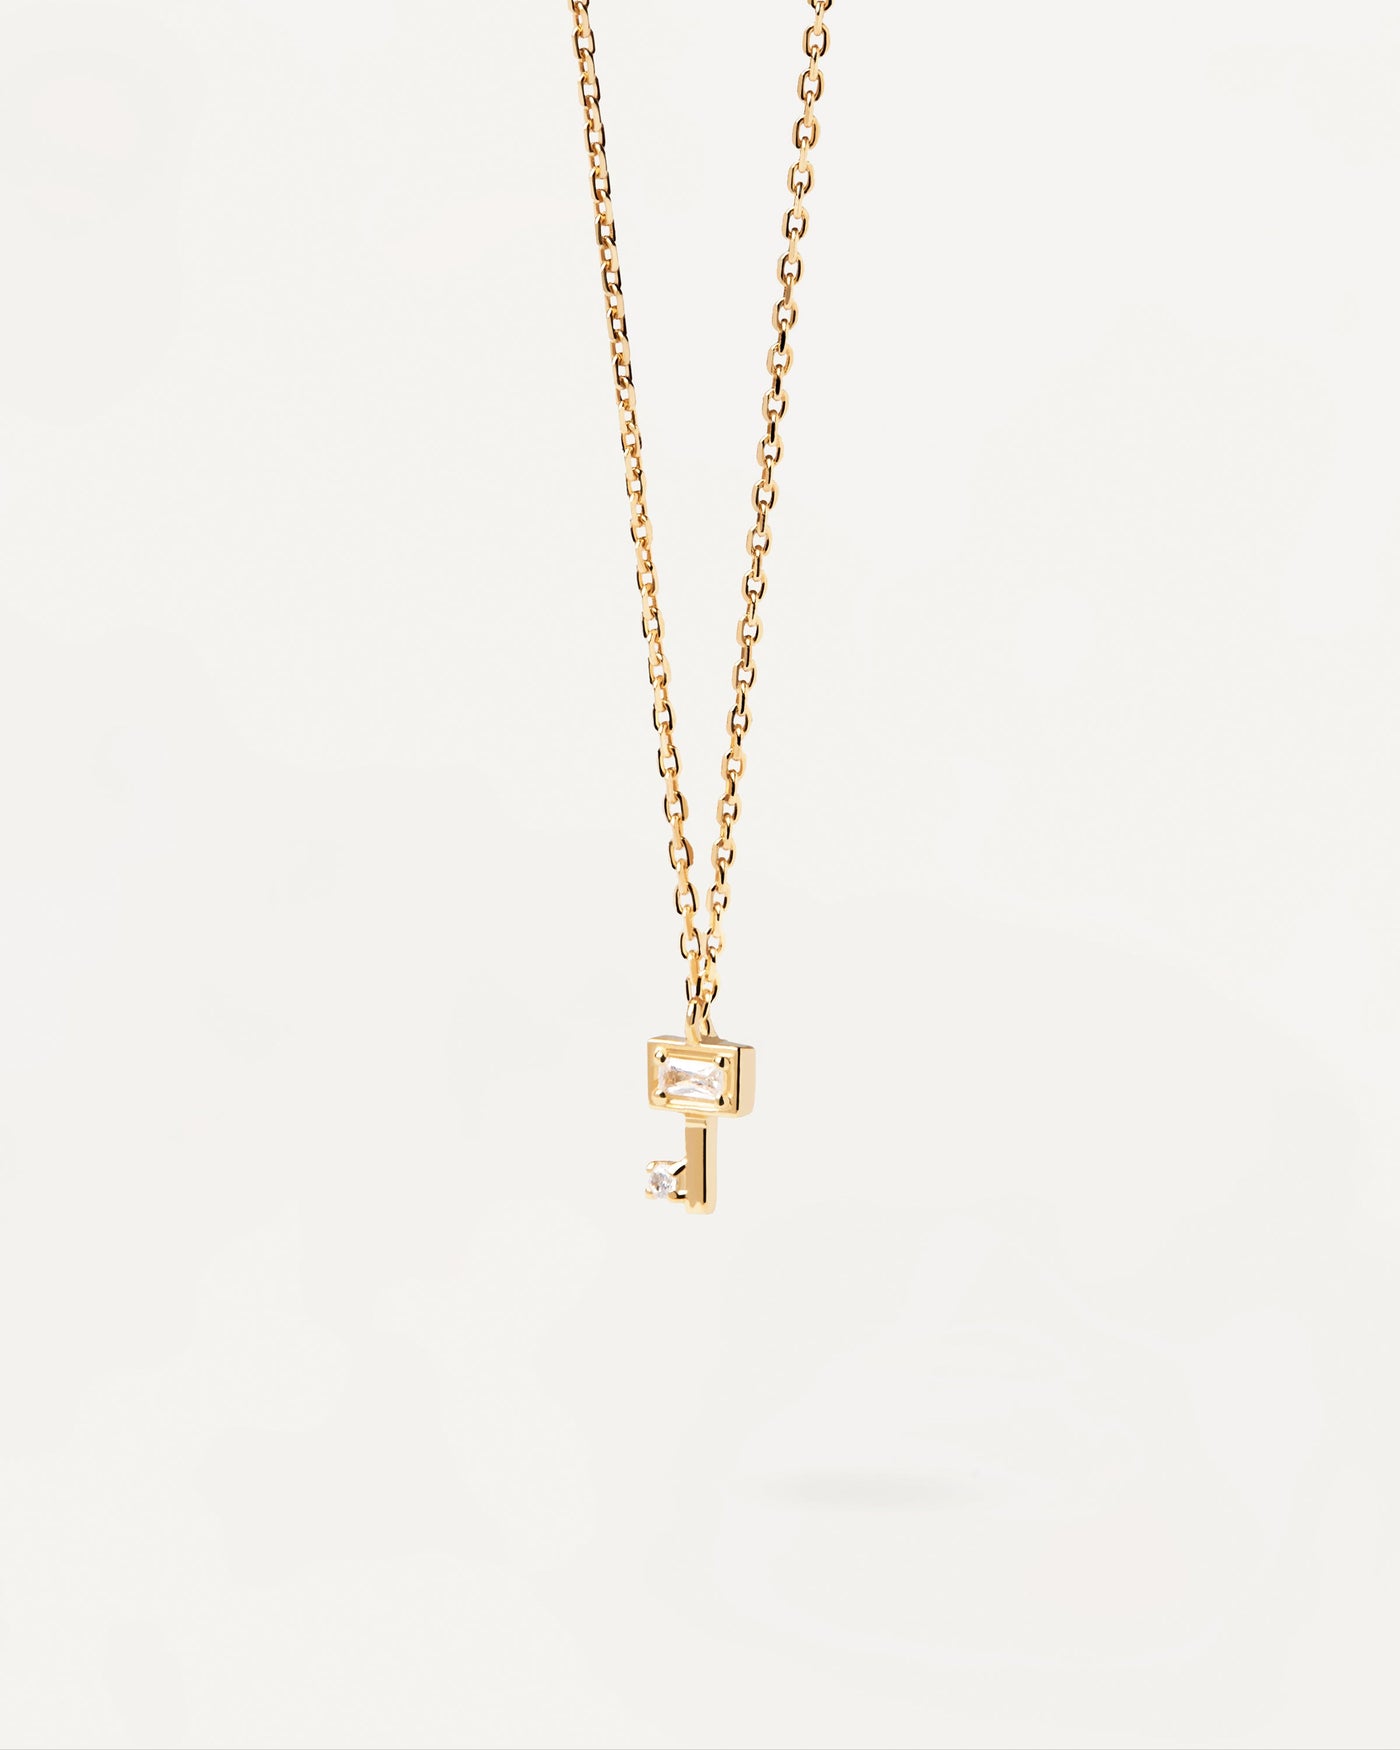 2023 Selection | Key Necklace. Gold-plated necklace with key pendant and white zirconia. Get the latest arrival from PDPAOLA. Place your order safely and get this Best Seller. Free Shipping.